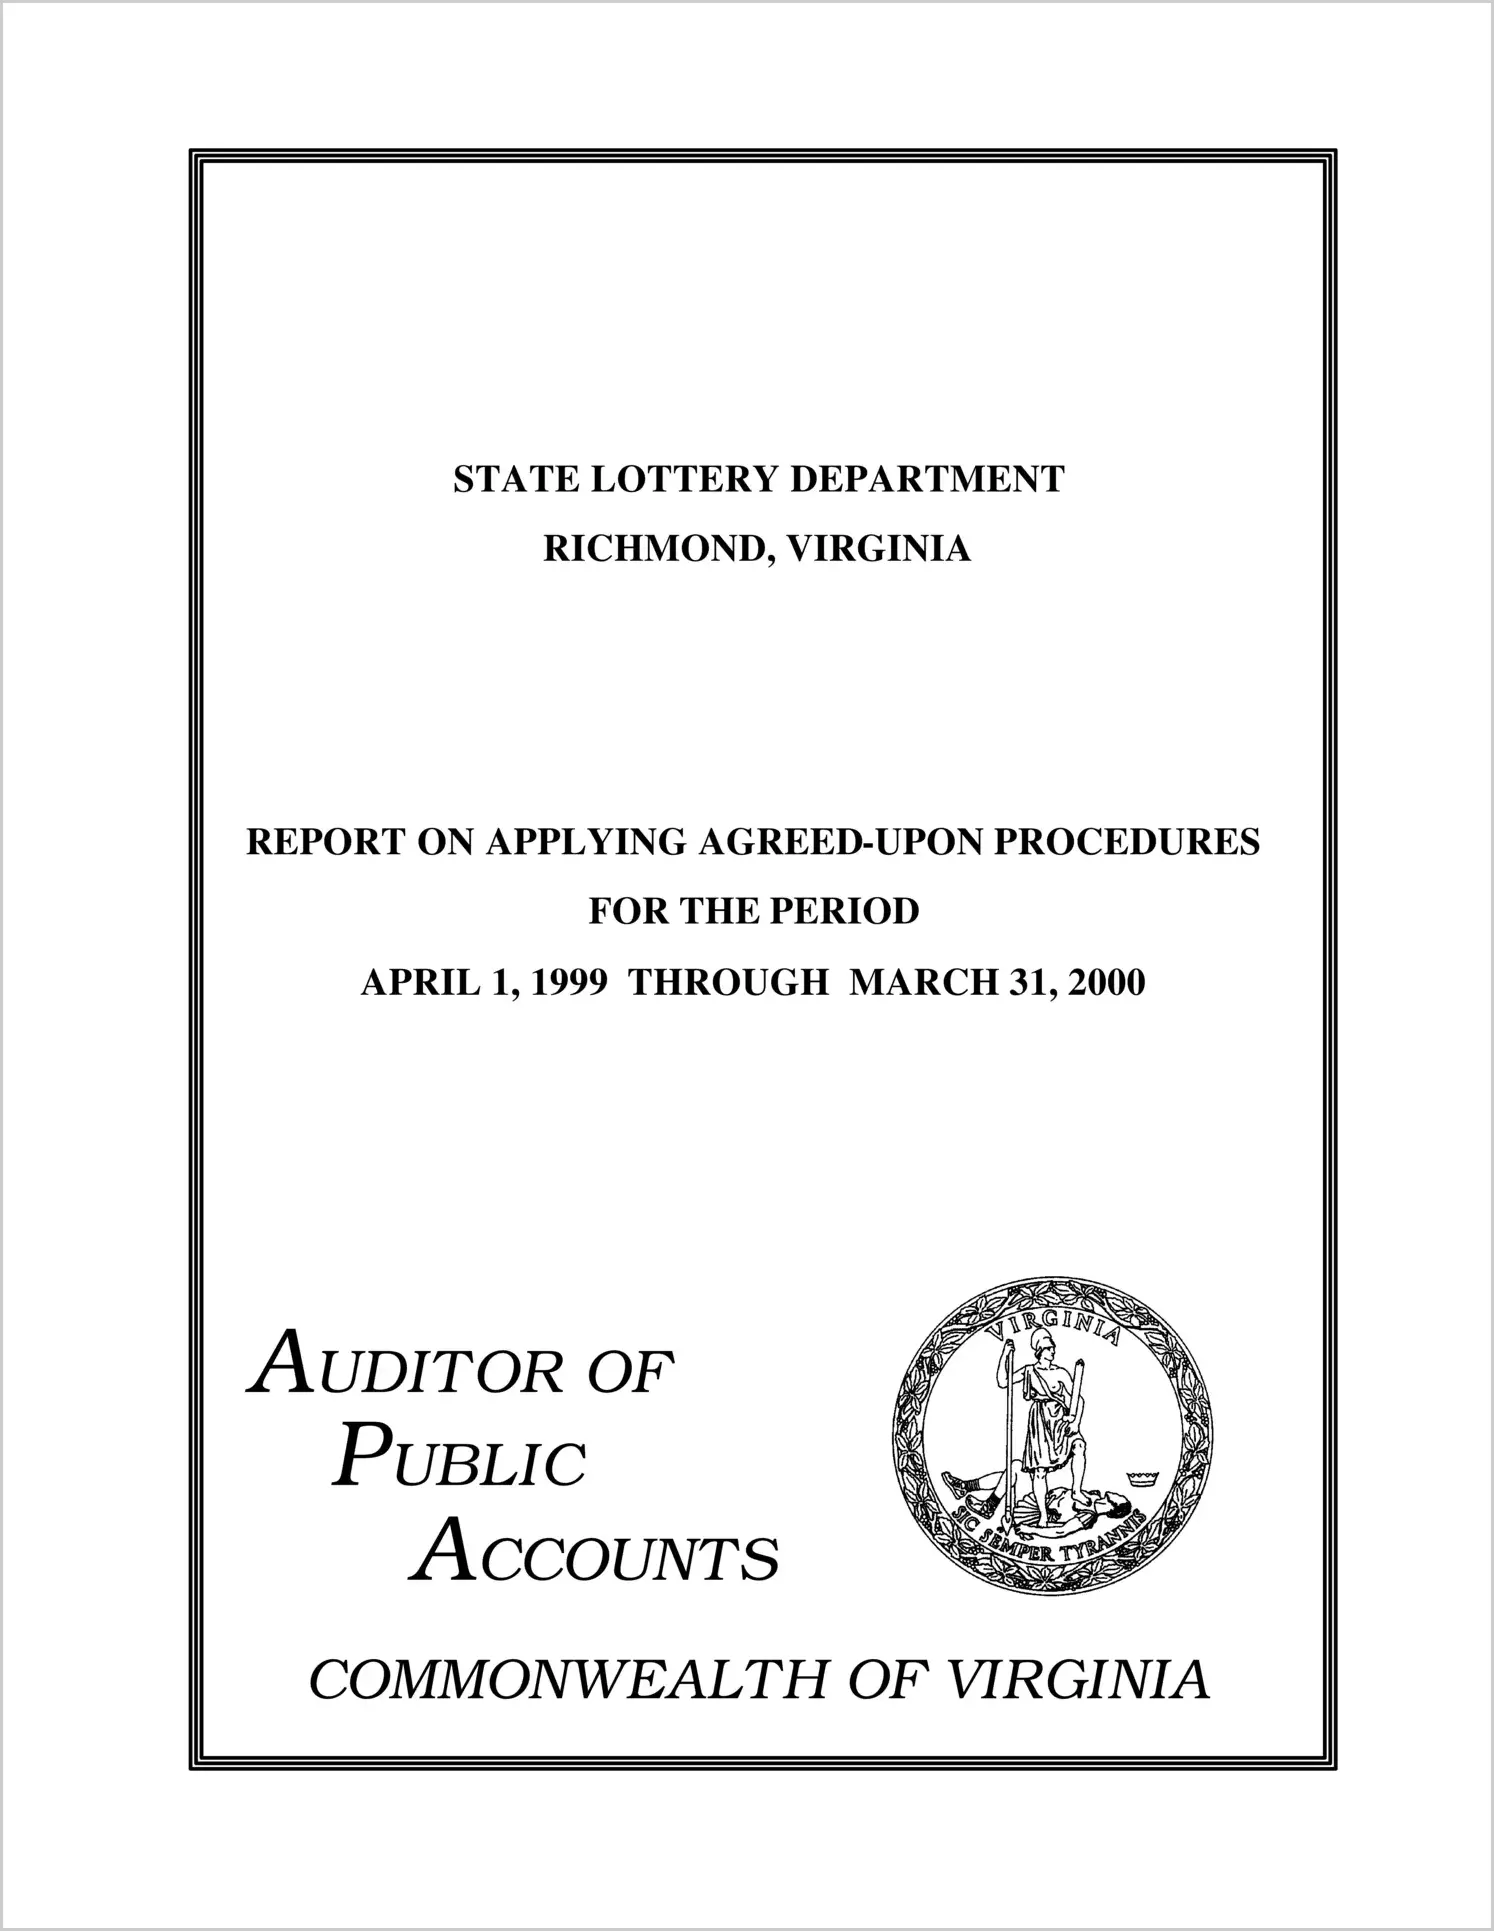 Special ReportState Lottery Department Report on Applying Agreed-Upon Procedures (Big Game) (Report Period: 4/1/1999 - 3/31/2000)